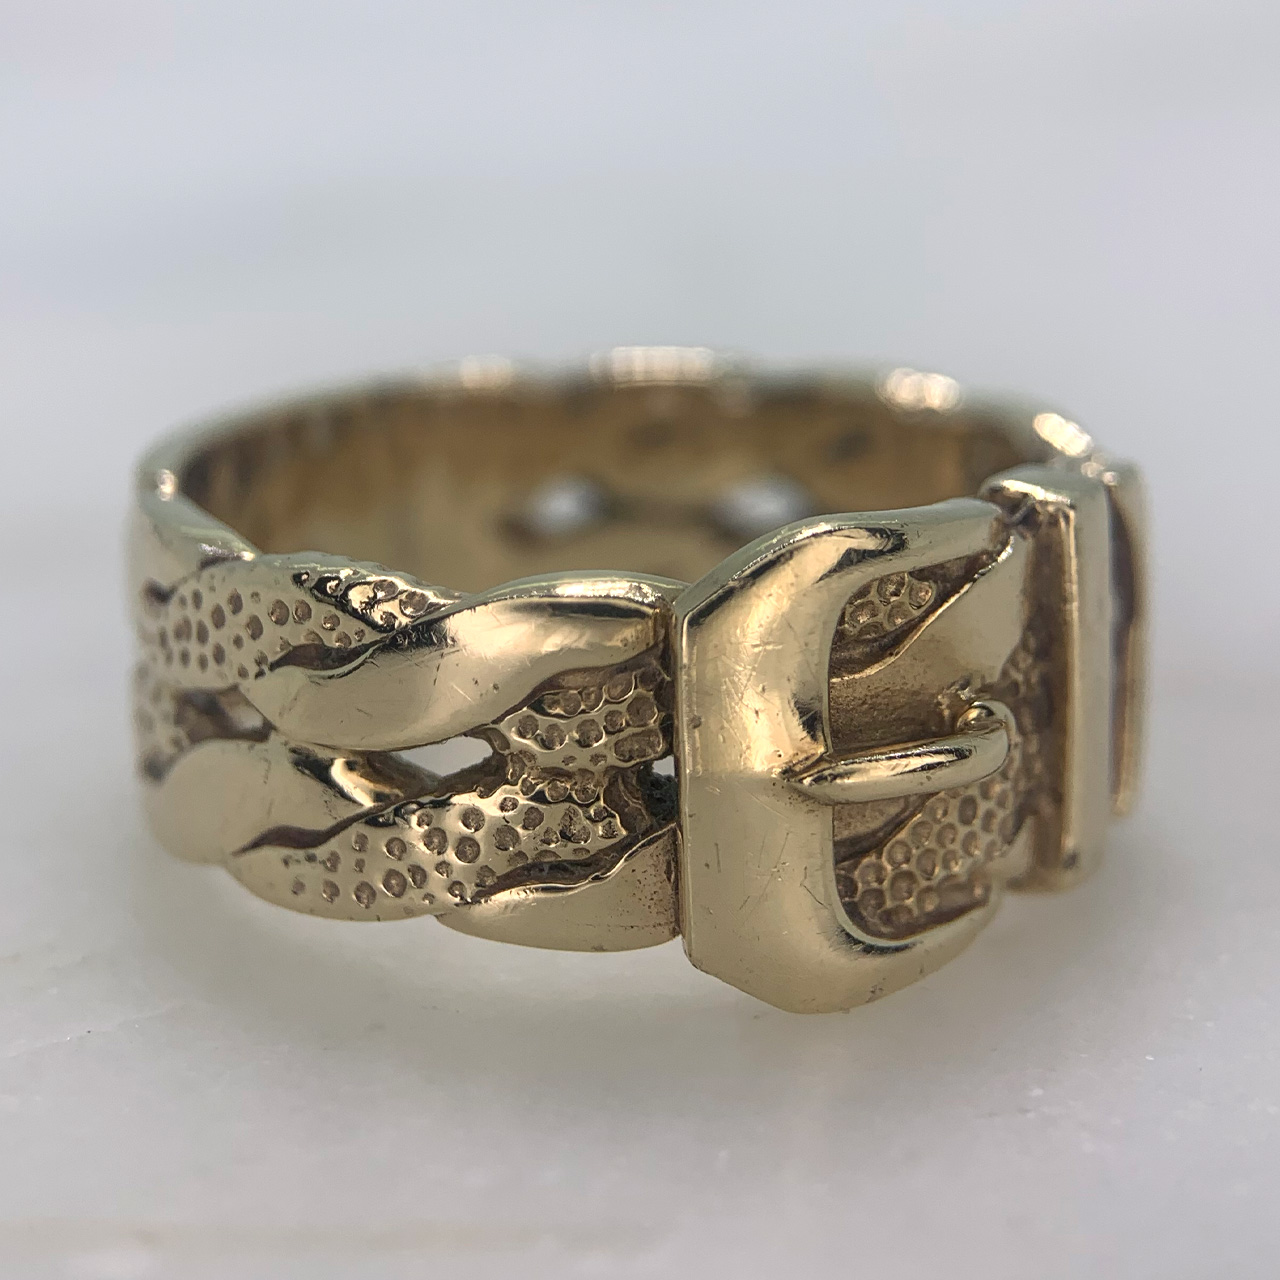 Perfect Rope Twist Buckle Ring in 9ct yellow gold. The Buckle is decorated with a twisted rope design and texture detailing. The solid gold buckle ring is heavy in weight and has a width of 8 mm. The back of the shank is polished to allow for alterations in size, some small colour variations and the removal of original hallmark by previous sizing not completed by our jewellers. An excellent ring in good condition. 